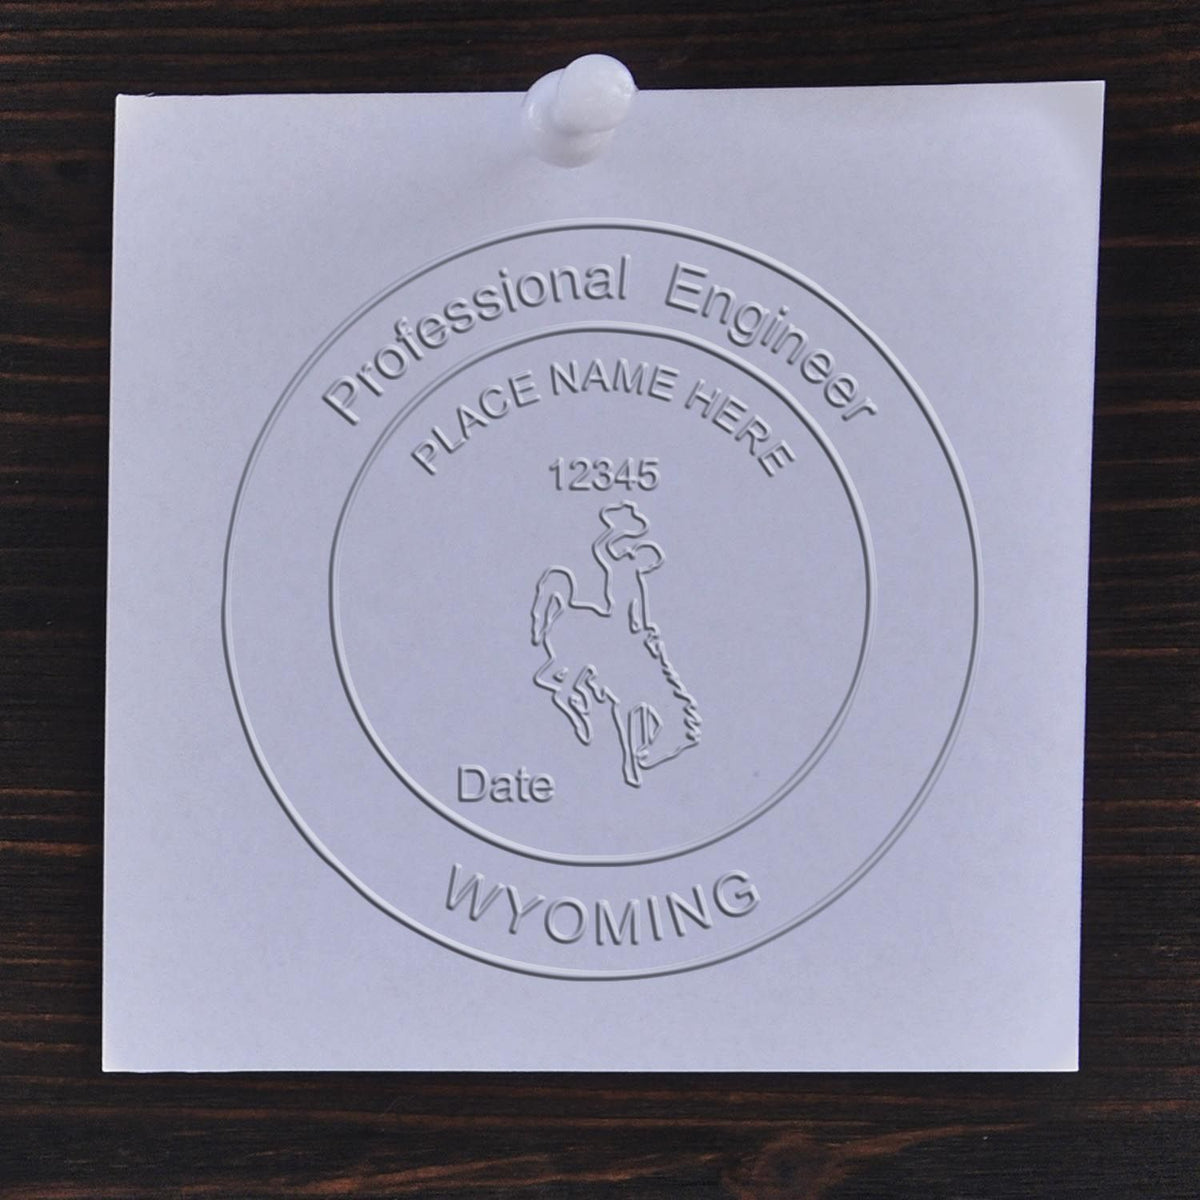 A lifestyle photo showing a stamped image of the Handheld Wyoming Professional Engineer Embosser on a piece of paper